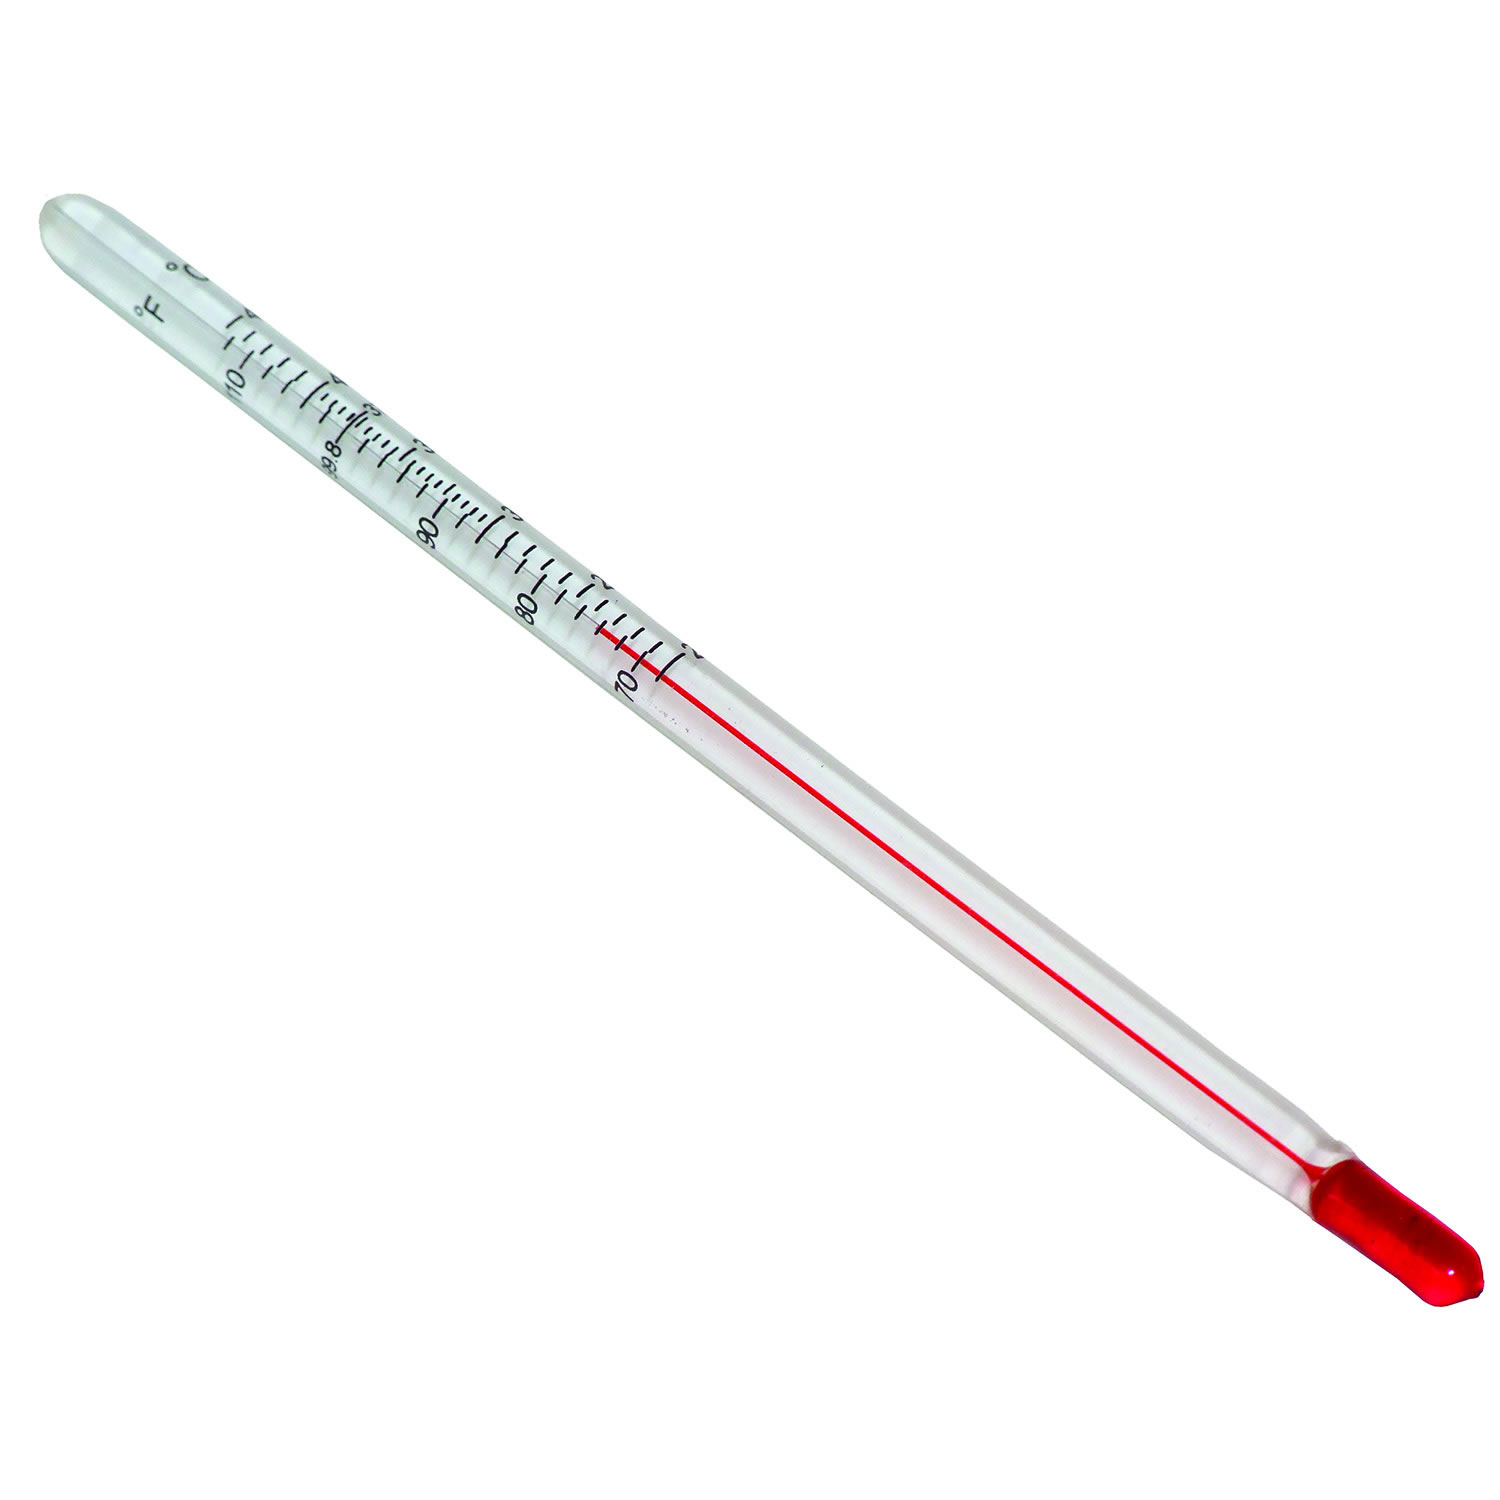 CHICKTEC GLASS STEM THERMOMETER 6 INCH